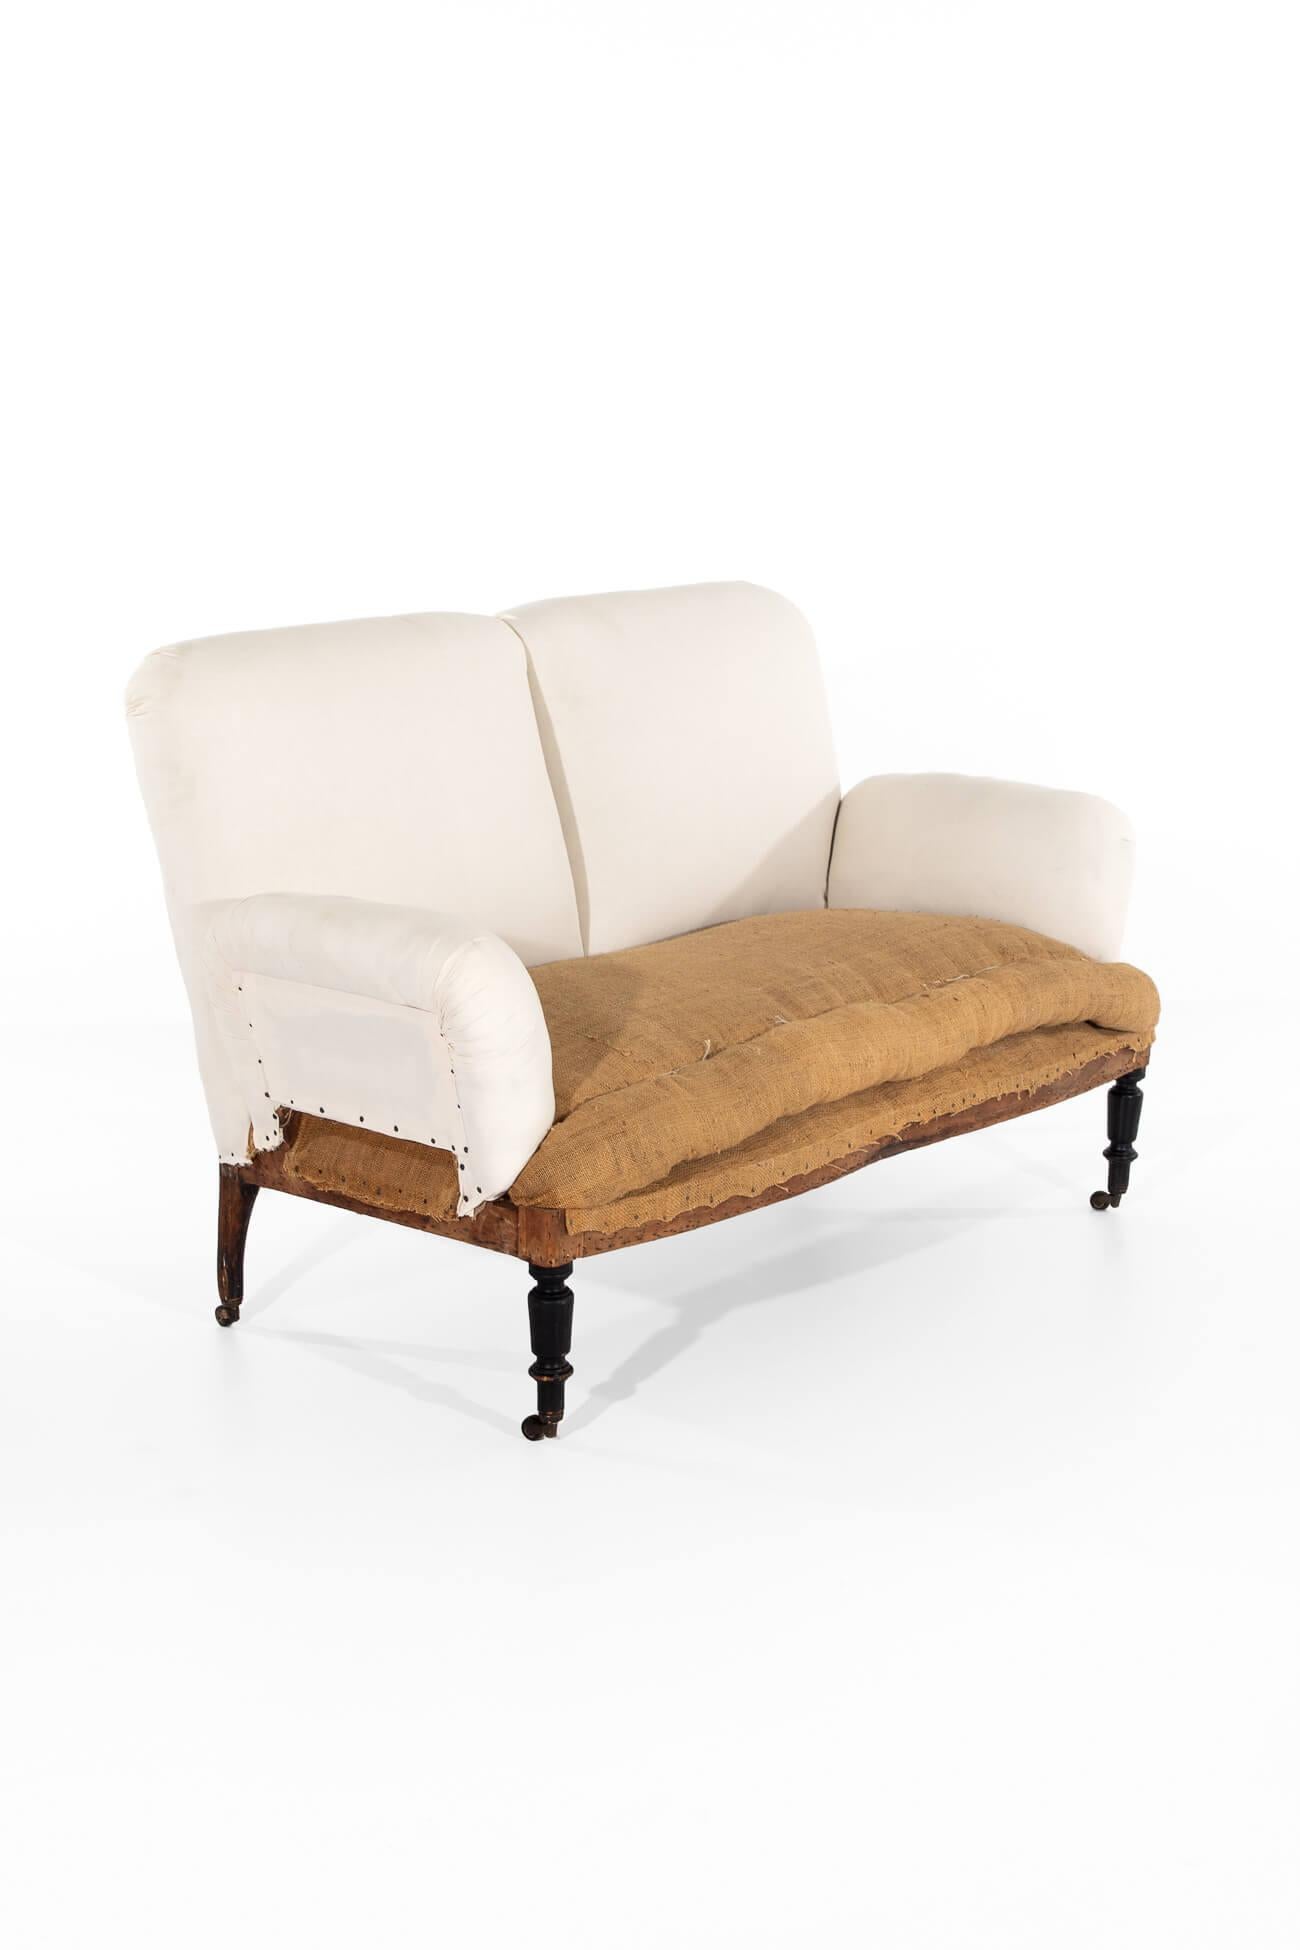 A splendid and generously proportioned Napolean III two-seater sofa.

The sofa has been fully restored, stripped back to the original solid walnut pegged frame with a new coil spring base, padding, hessian lining, and calico coverings added to the